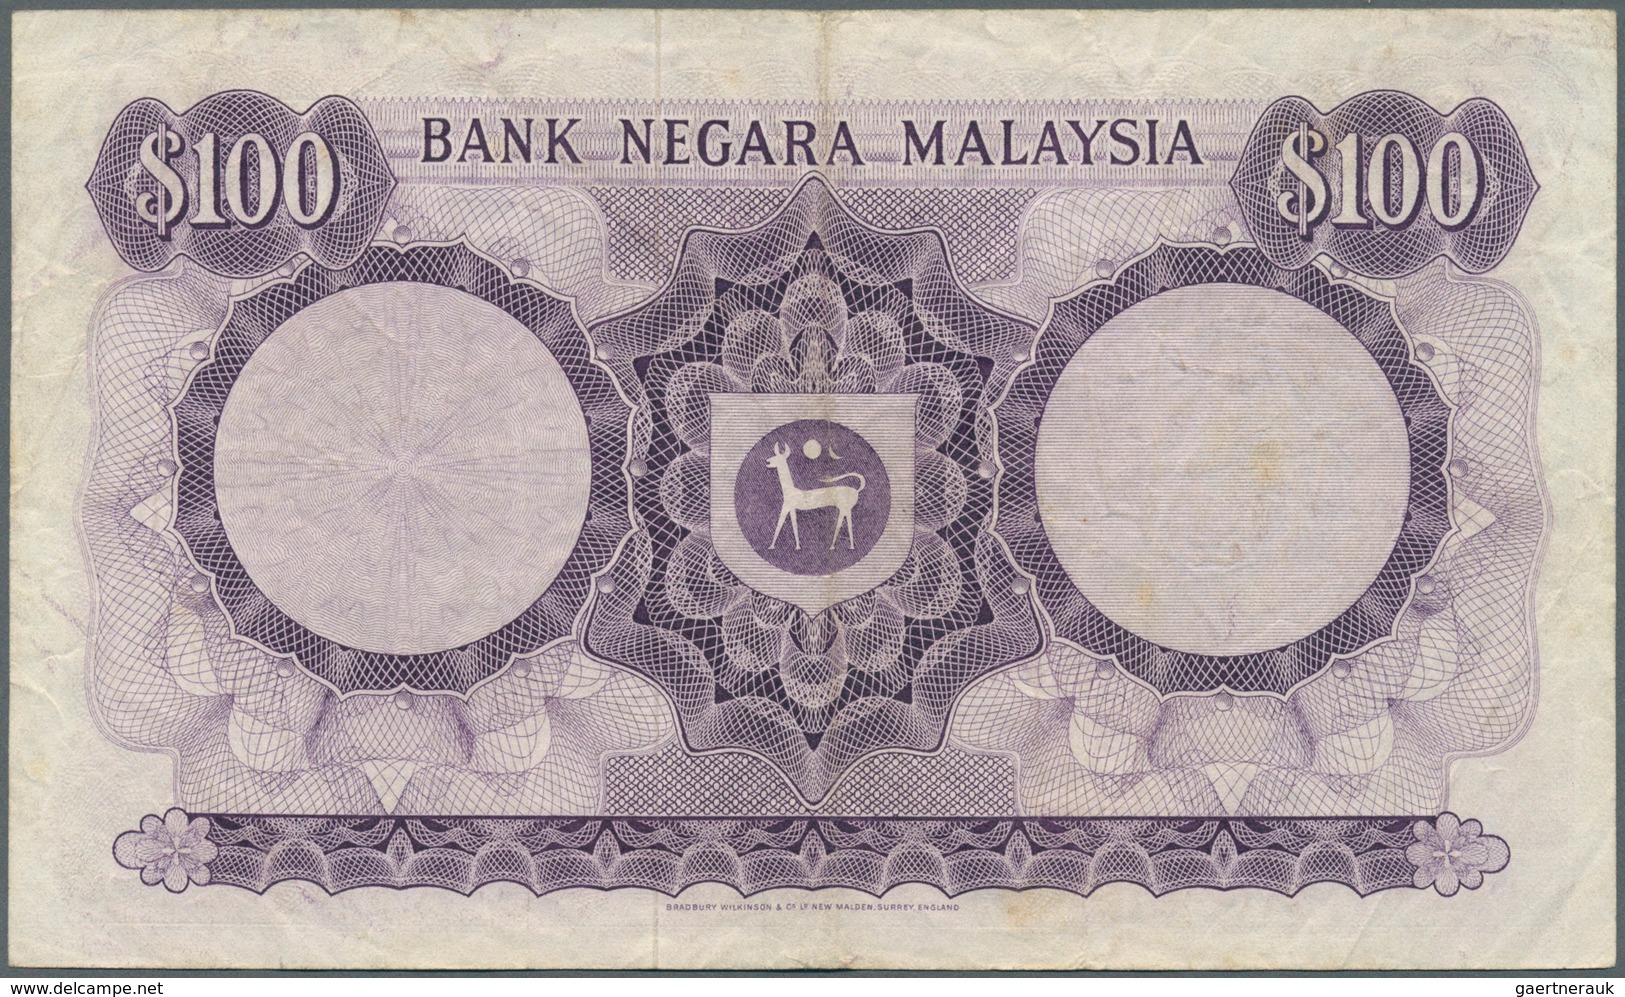 01991 Malaysia: Bank Negara Malaysia 100 Ringgit ND(1976-81), P.17, Still Nice And Attractive Note With A - Malasia